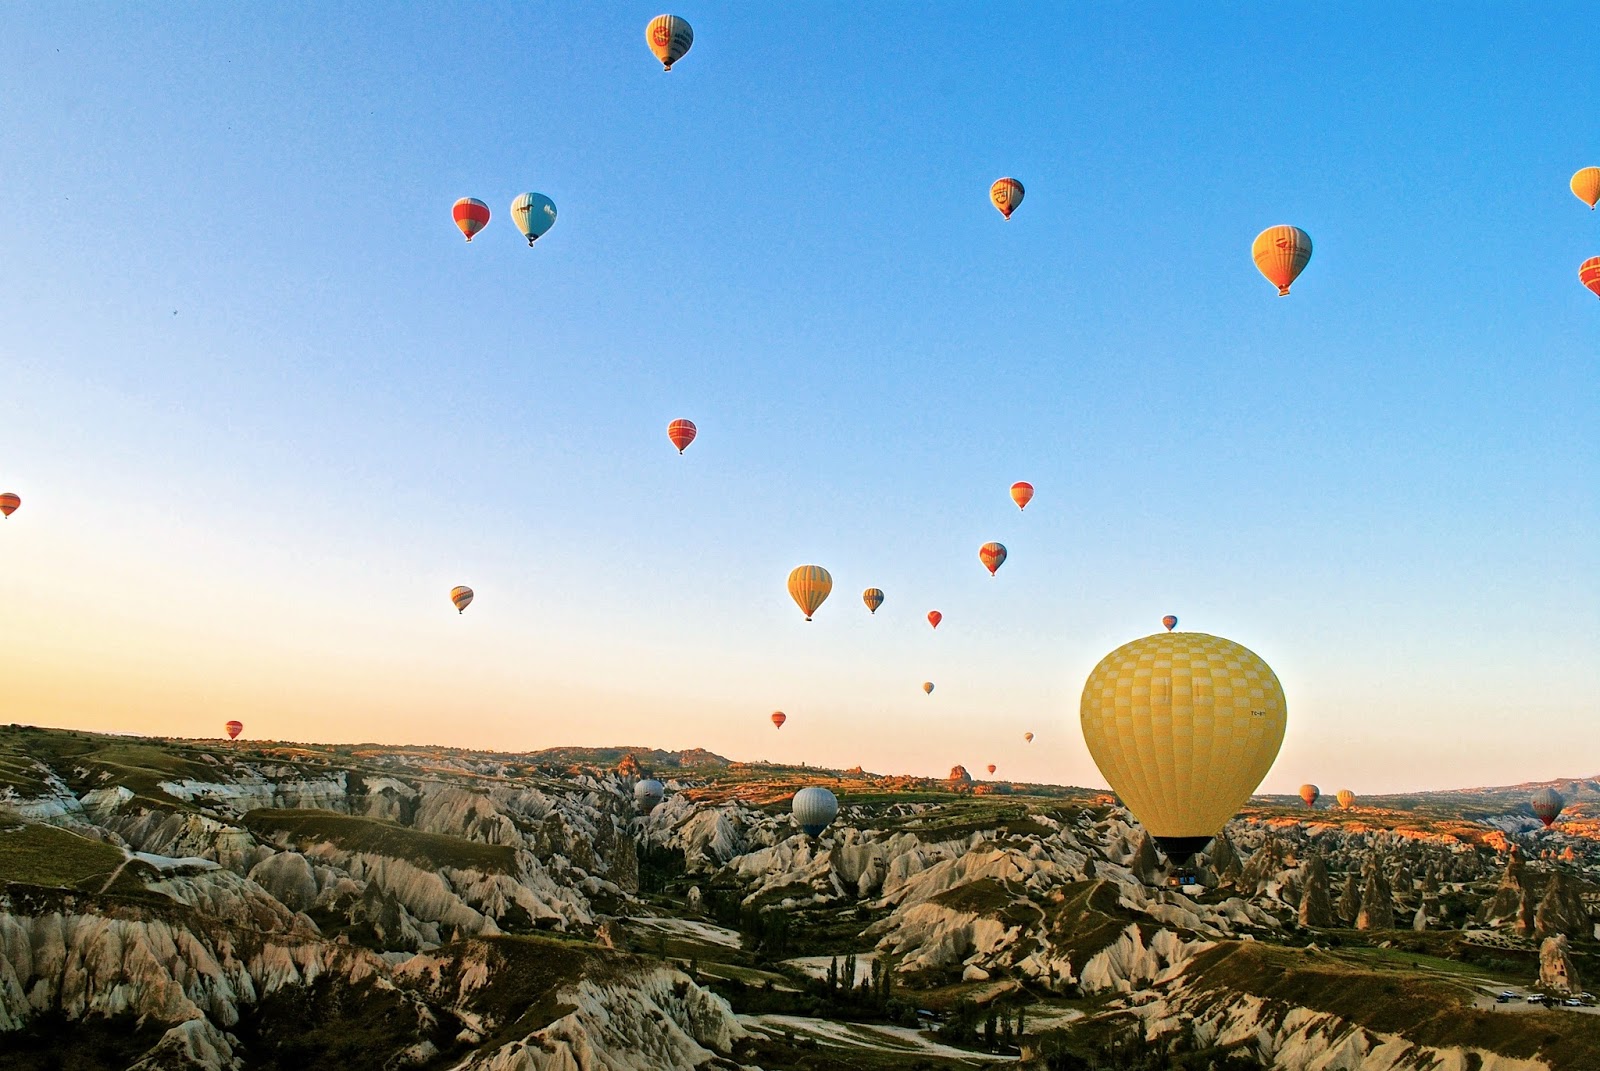 Hot Air Ballooning over Goreme Cappadocia at Sunrise with Butterfly Balloons